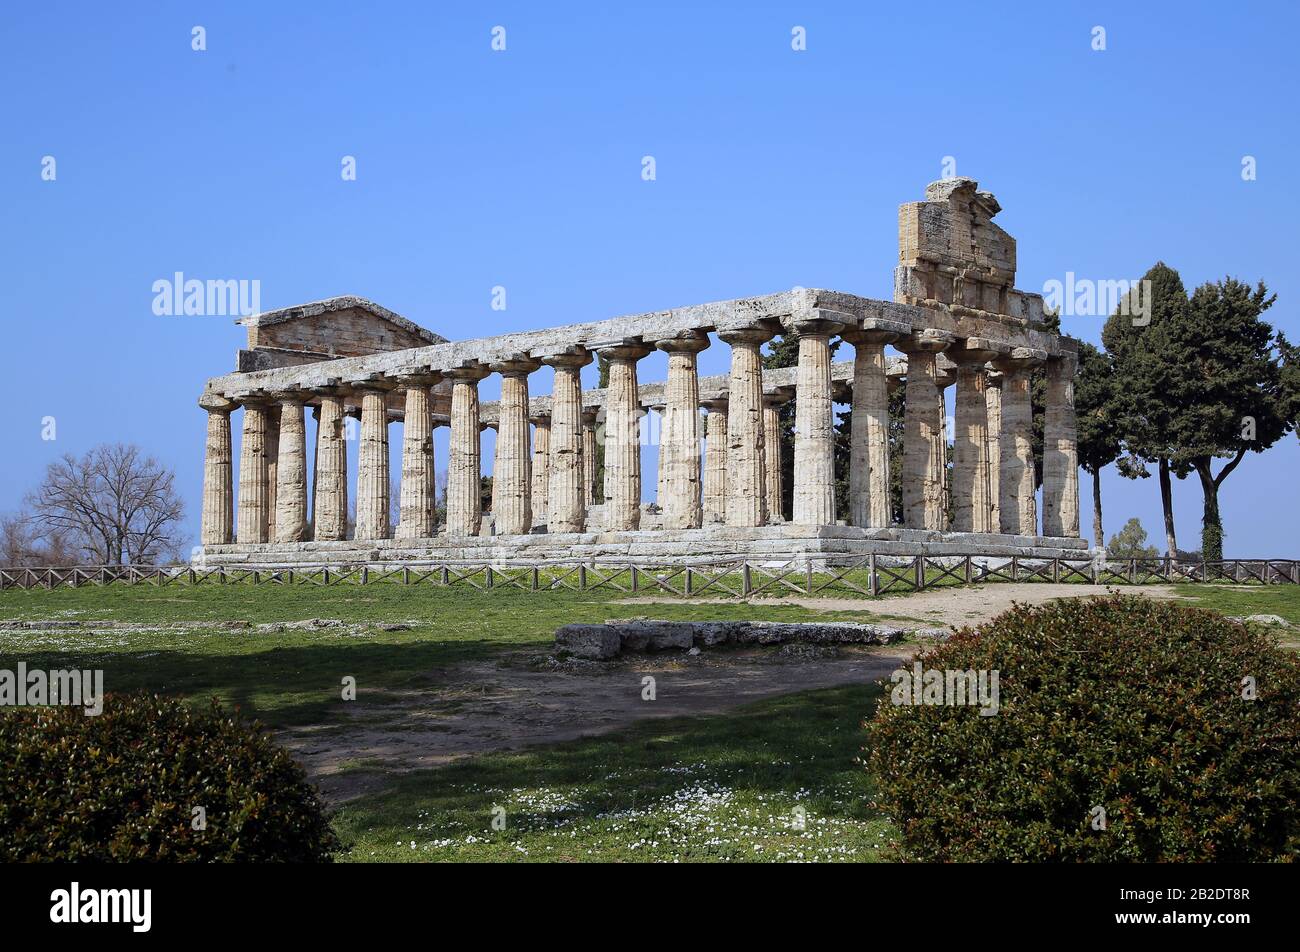 The temple of Athena ( so called temple of Ceres). C. 500 BC. Doric order. Archaeological site of Paestum, Campania, Italy. Stock Photo